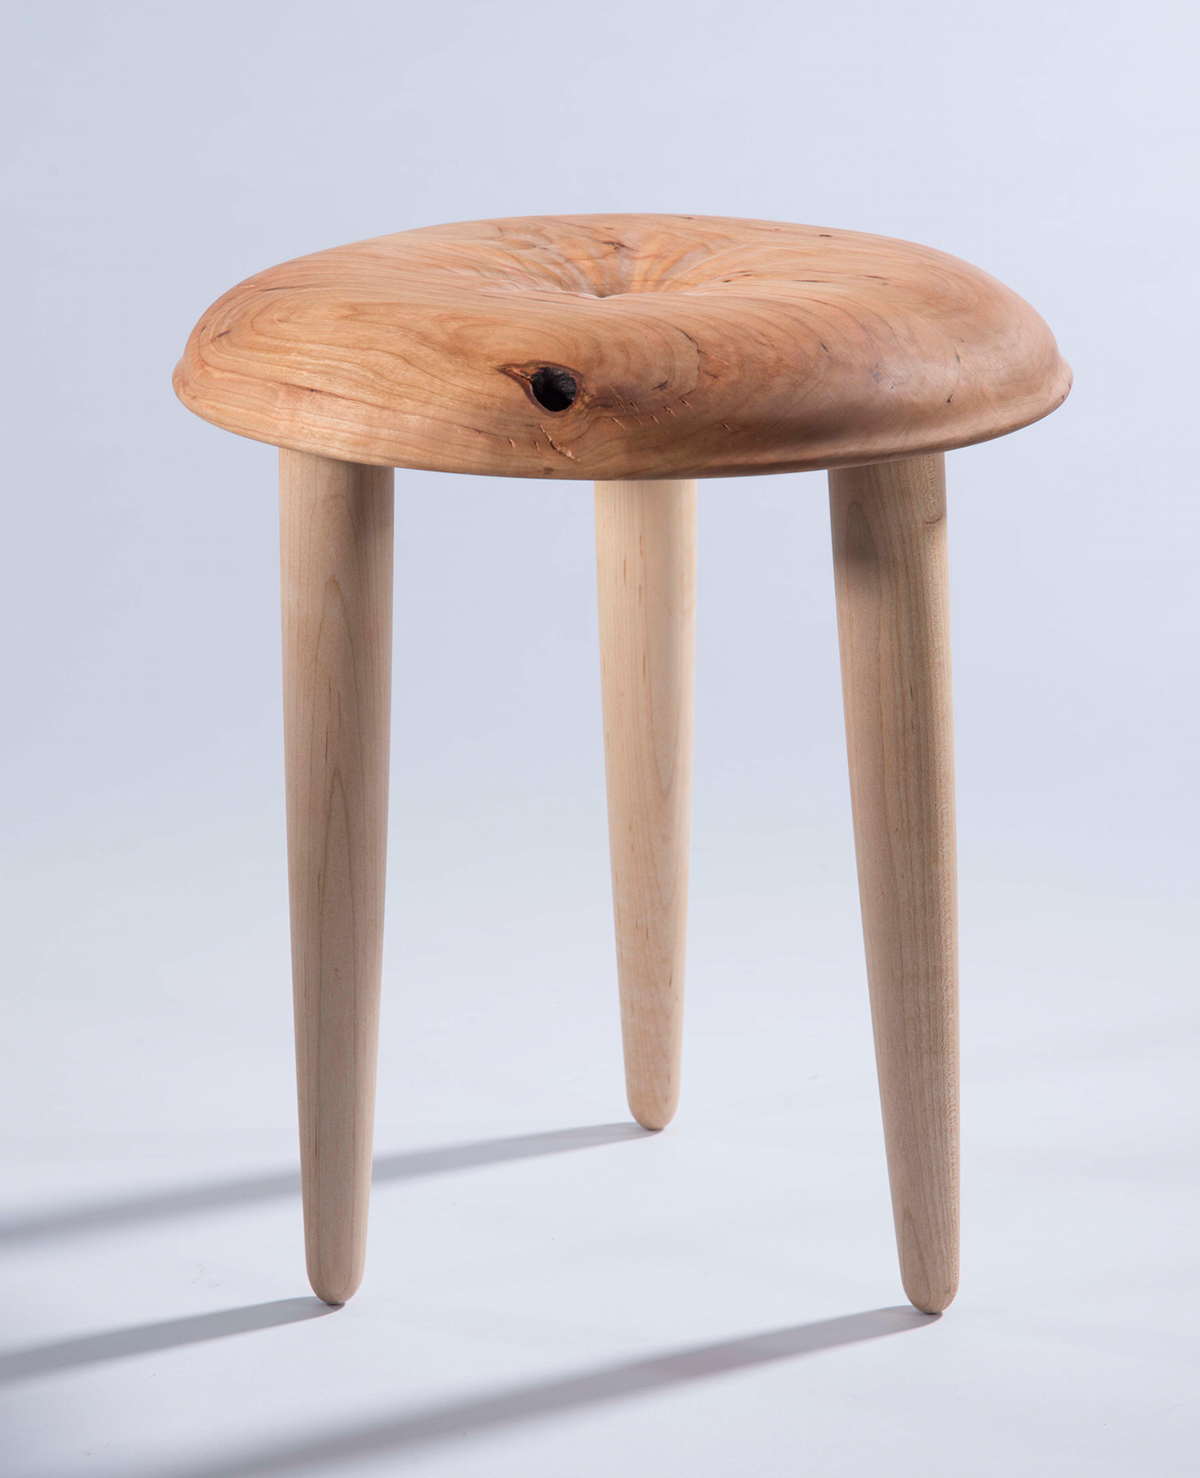 Anthropologie bourgeois cnc stool Solidworks fancy